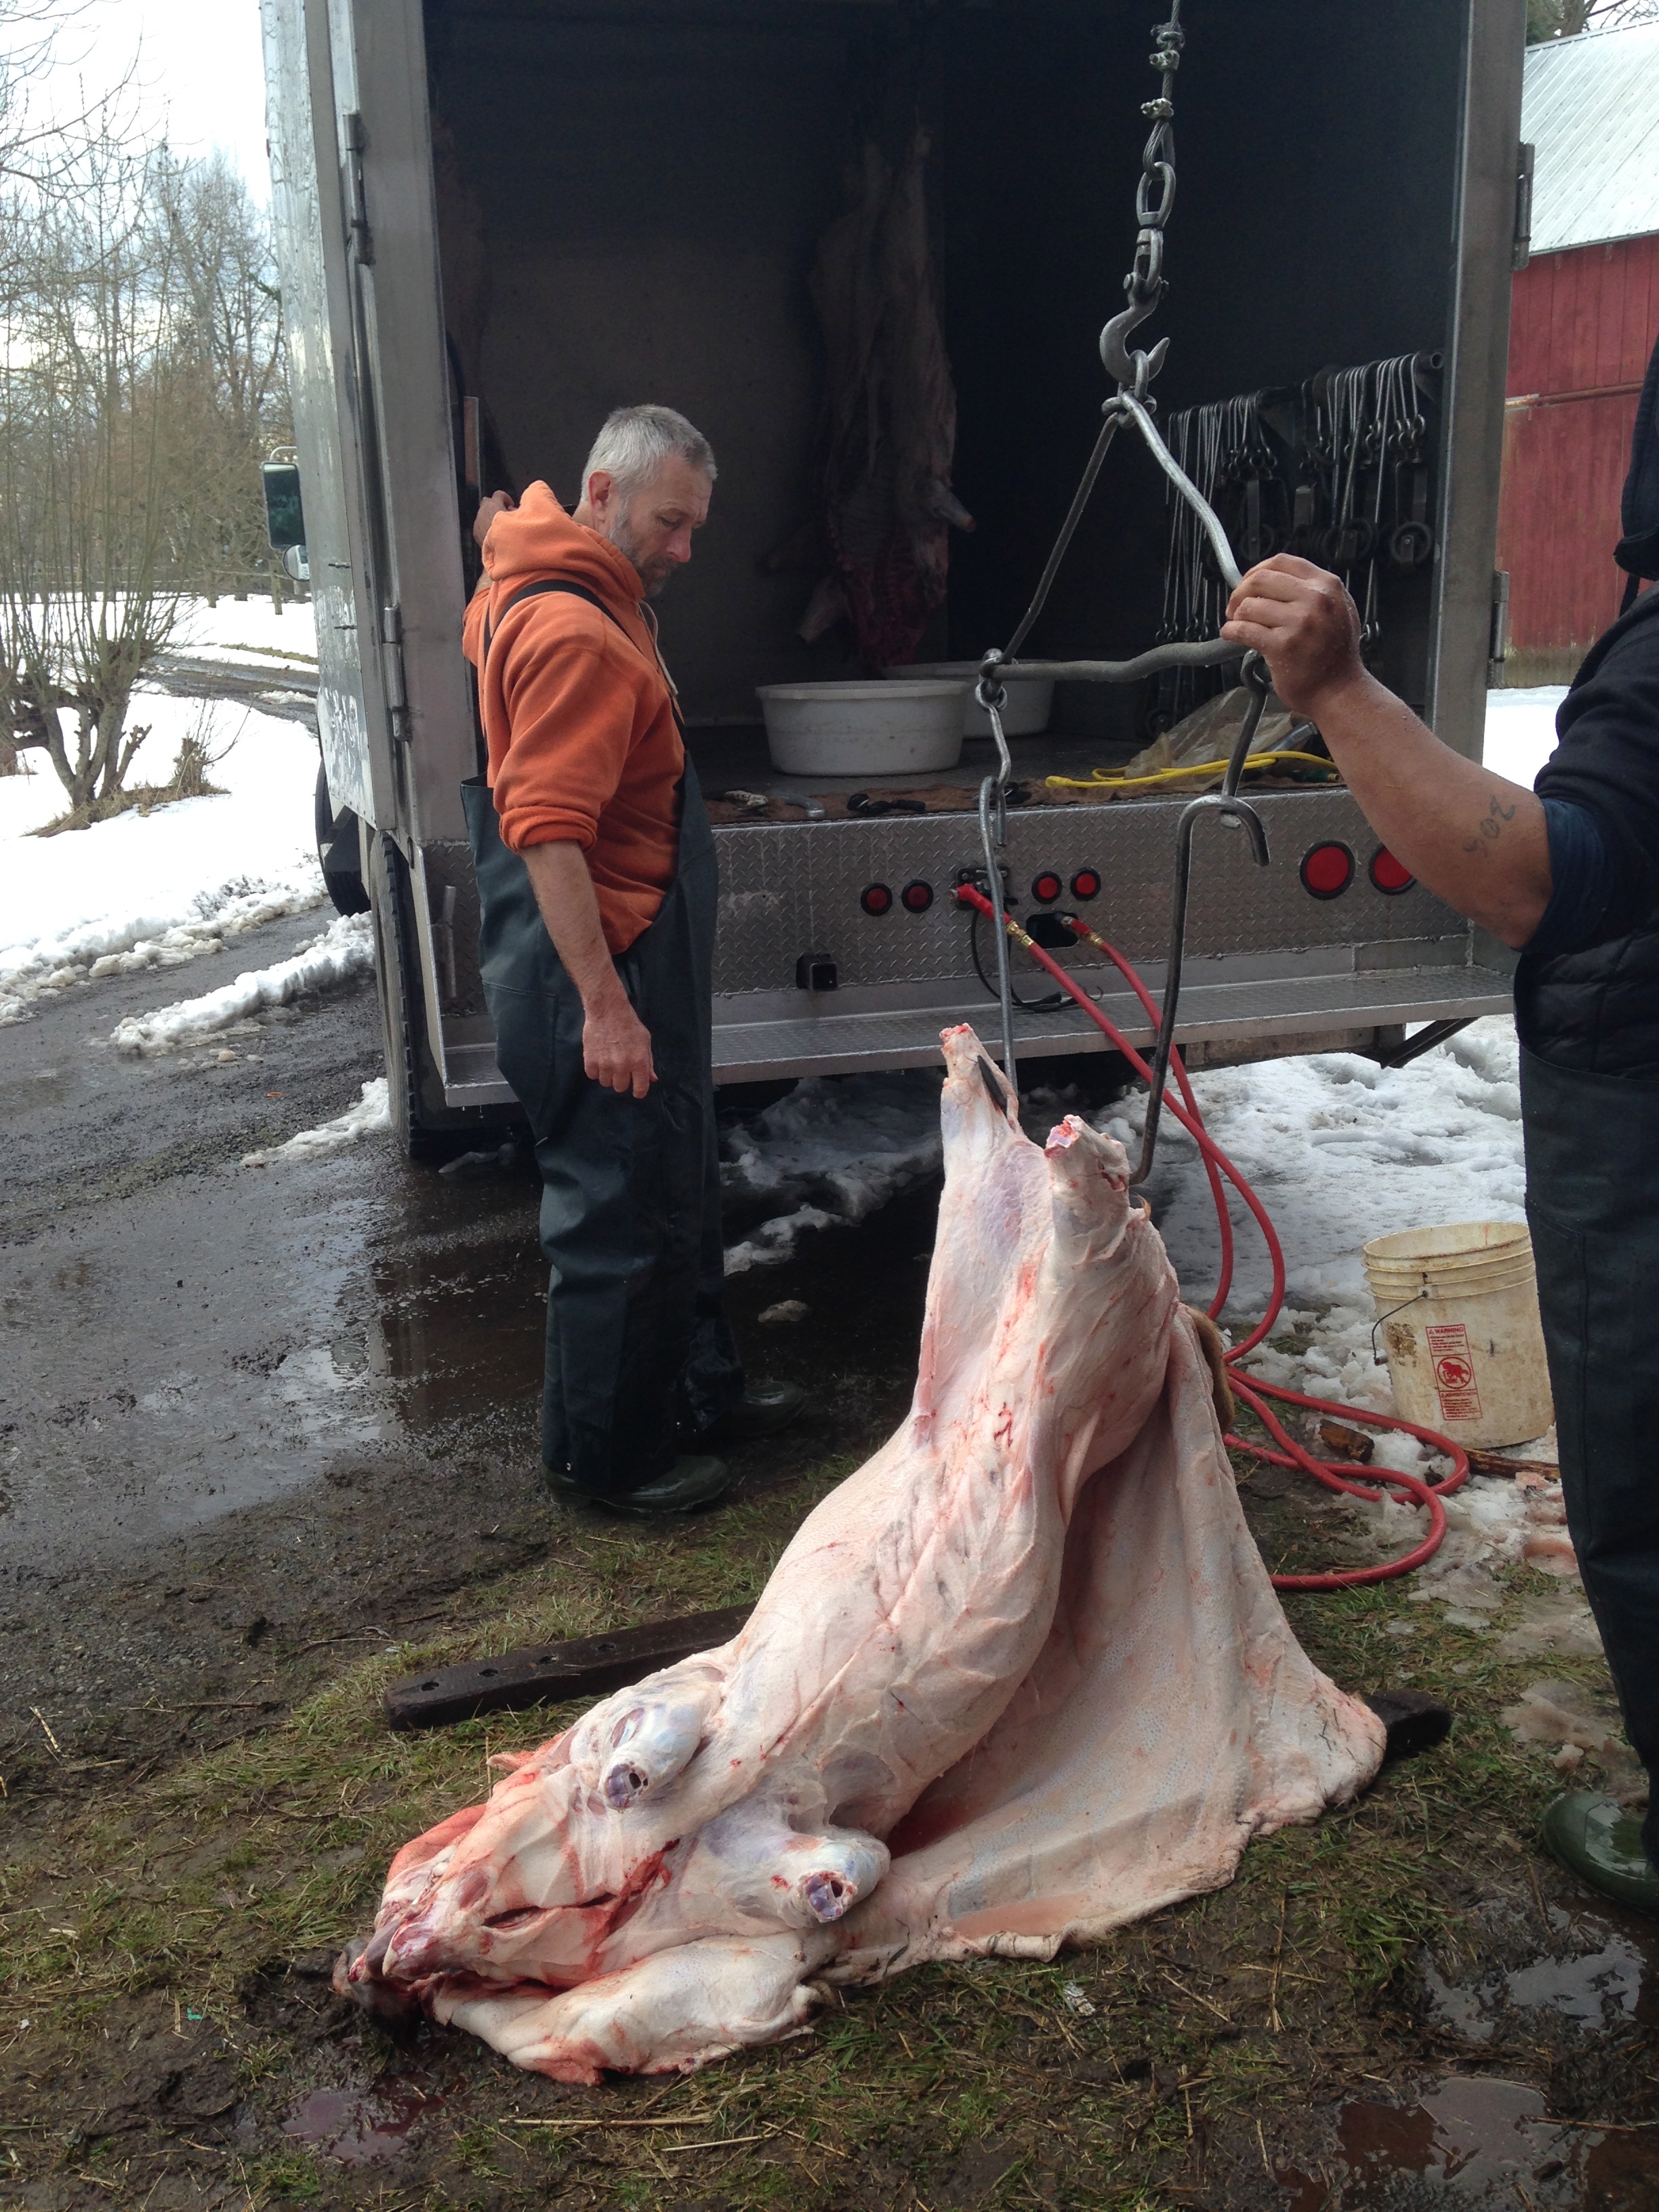 Hauling the pig up